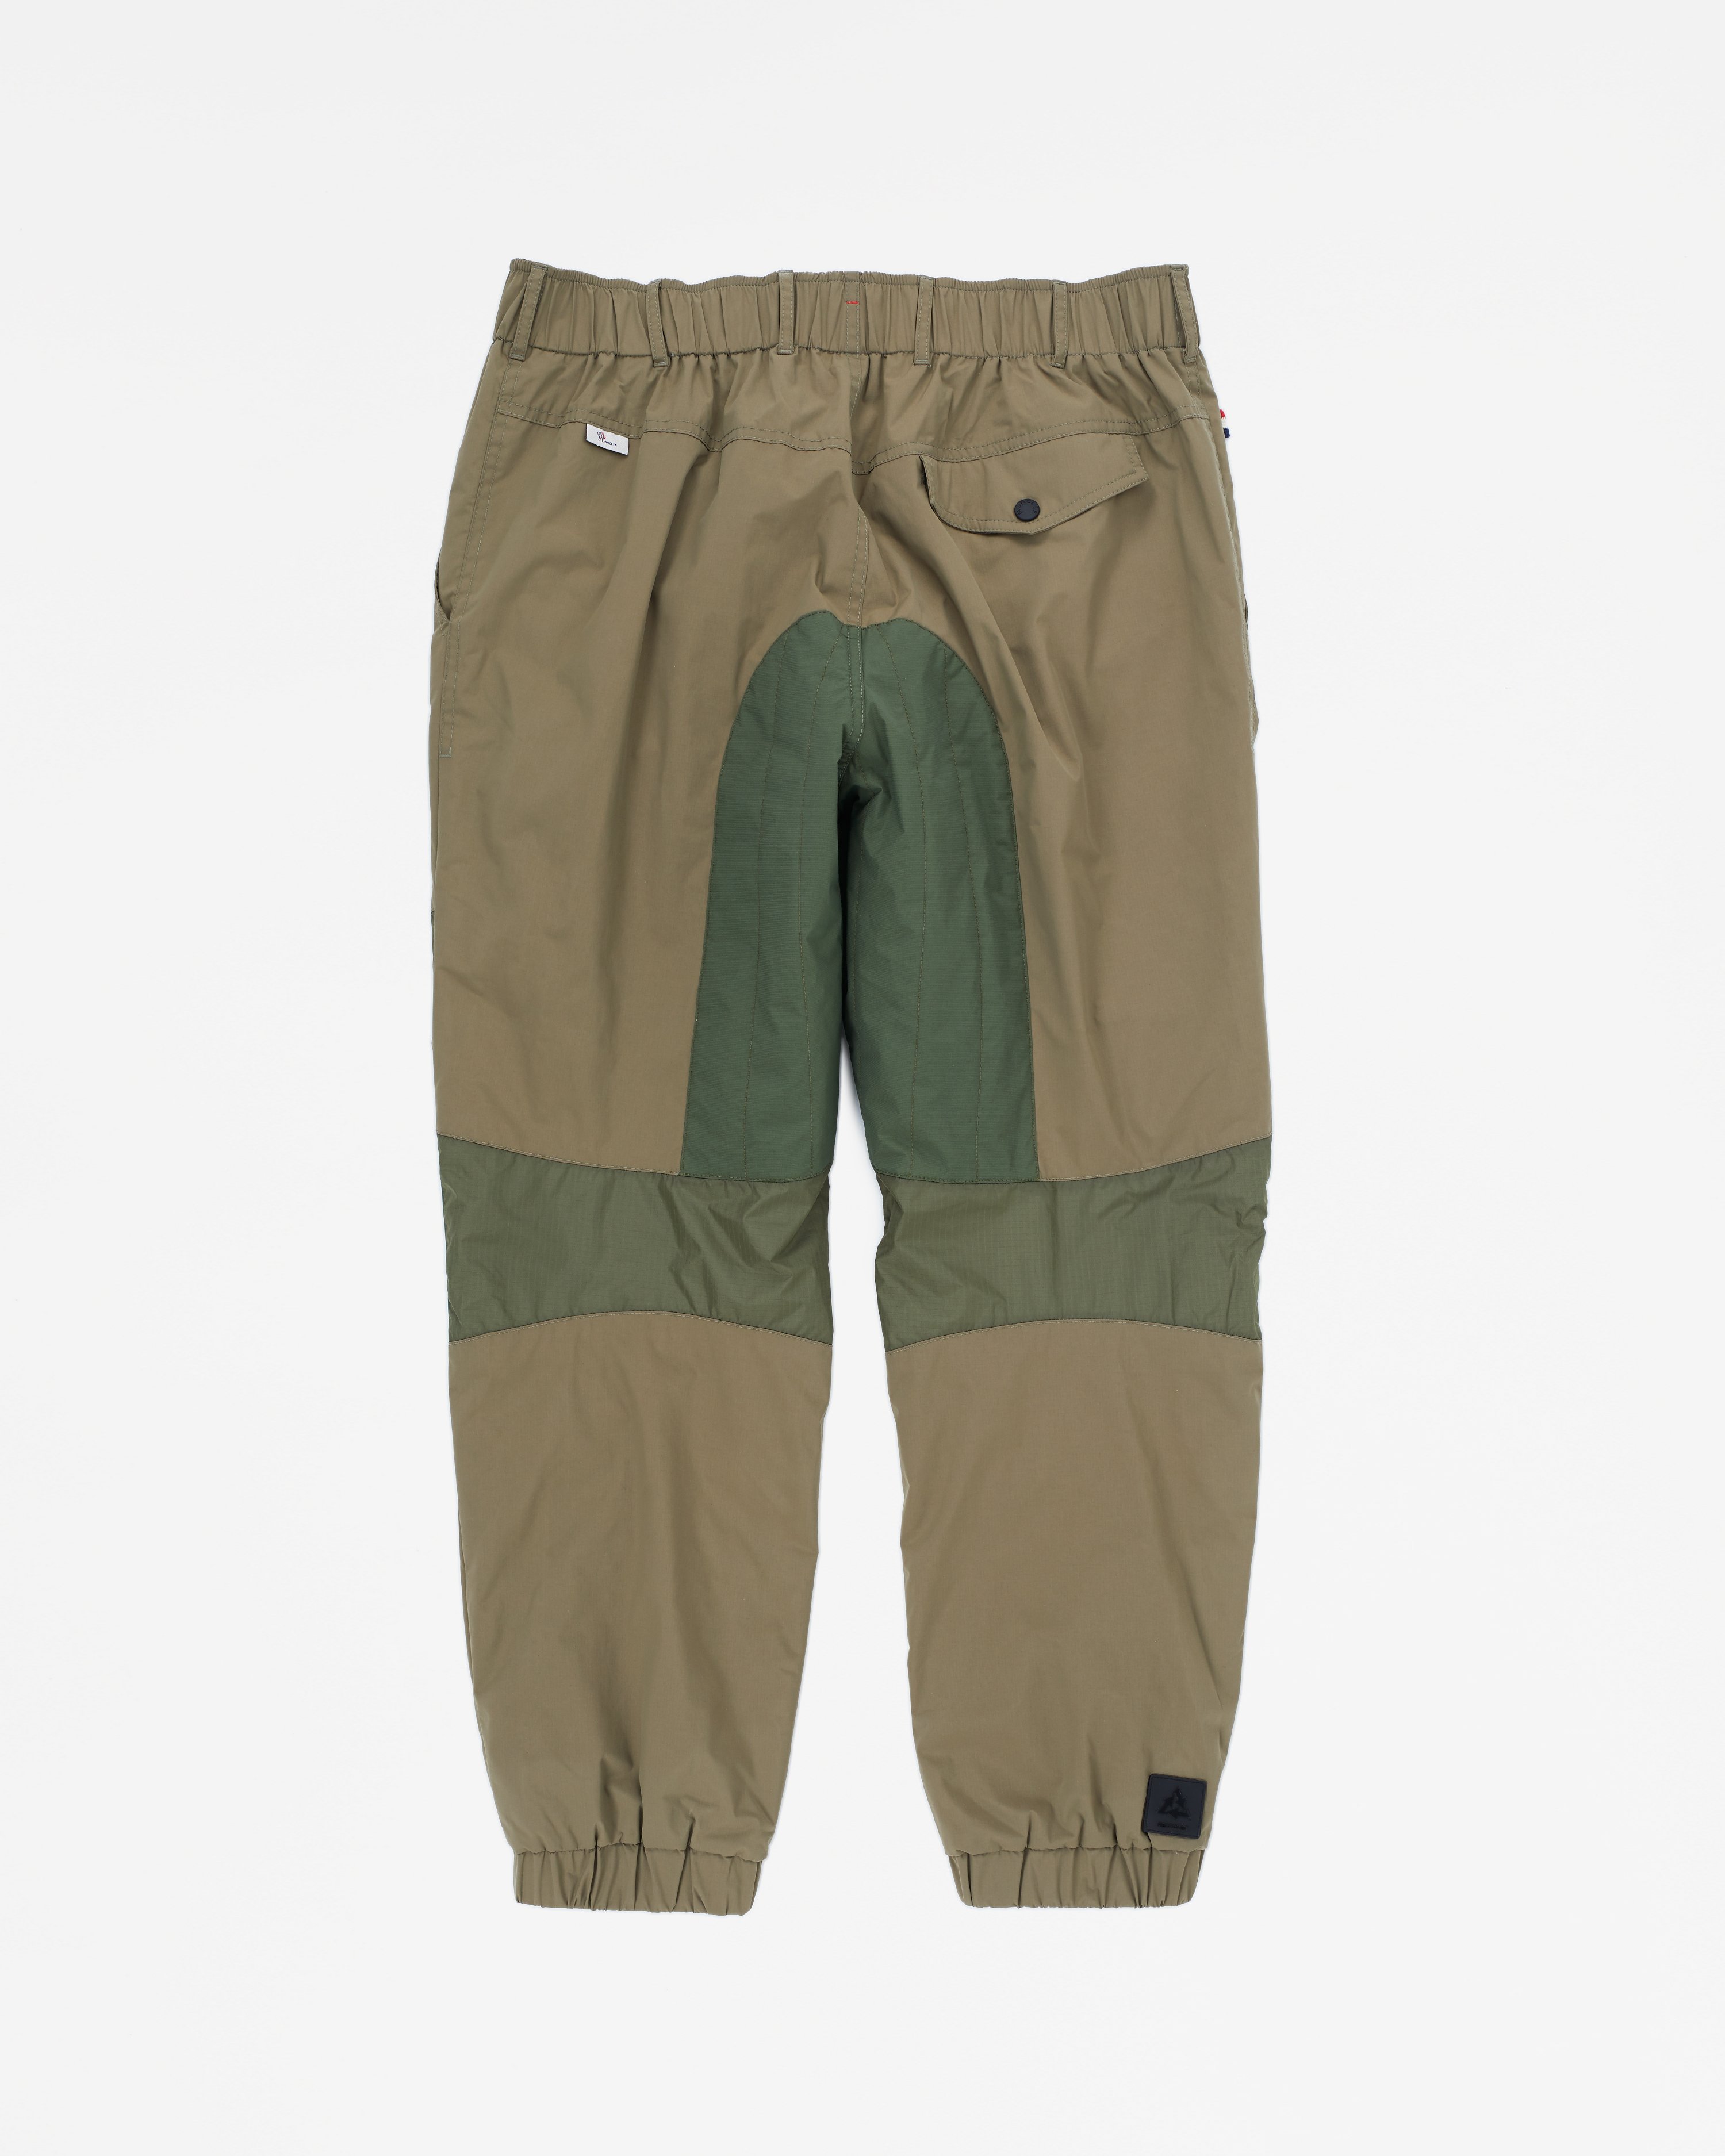 Moncler Genius - Recycled Sports Trousers - Clothing - Green - Image 2